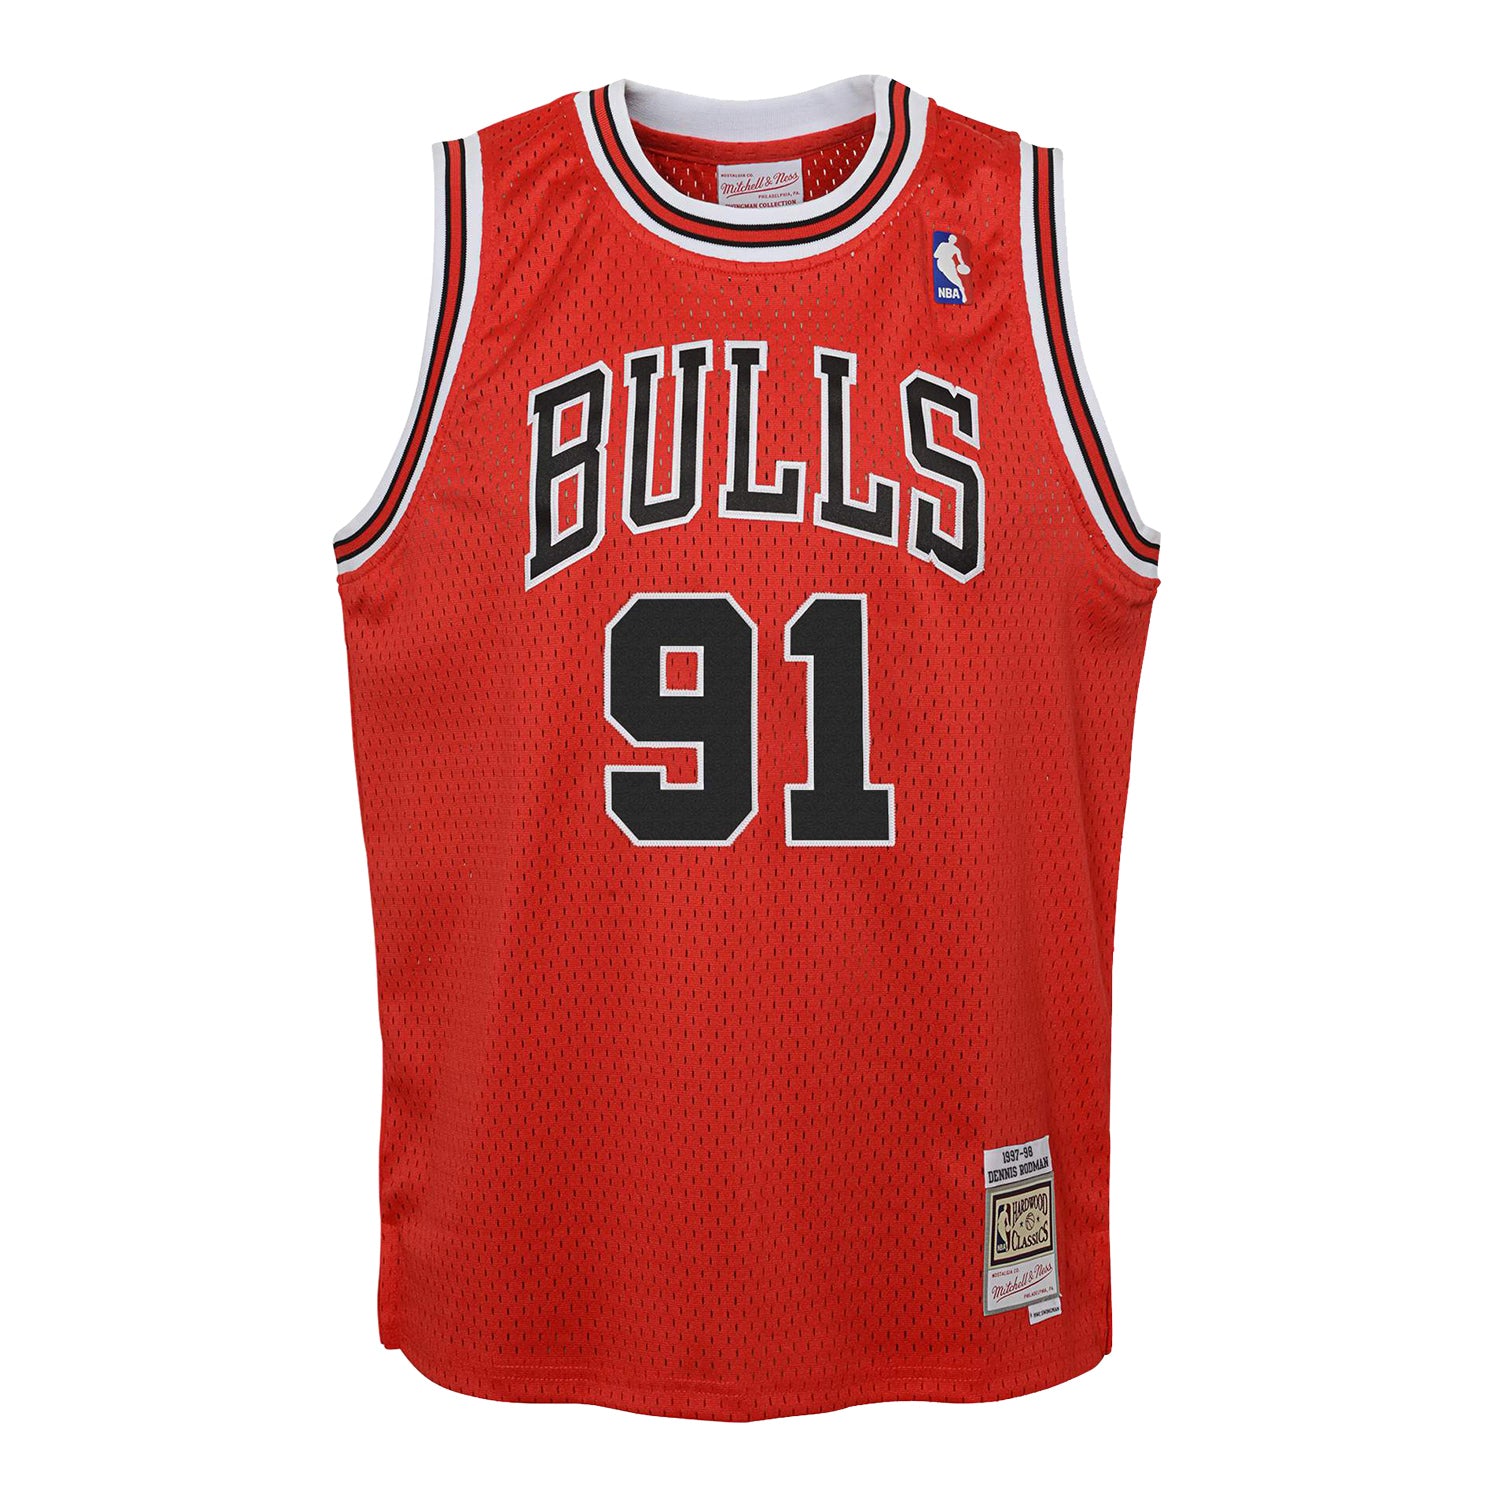 Youth Chicago Bulls Authentic Mitchell & Ness Dennis Rodman 1997-98 Jersey in red - front view